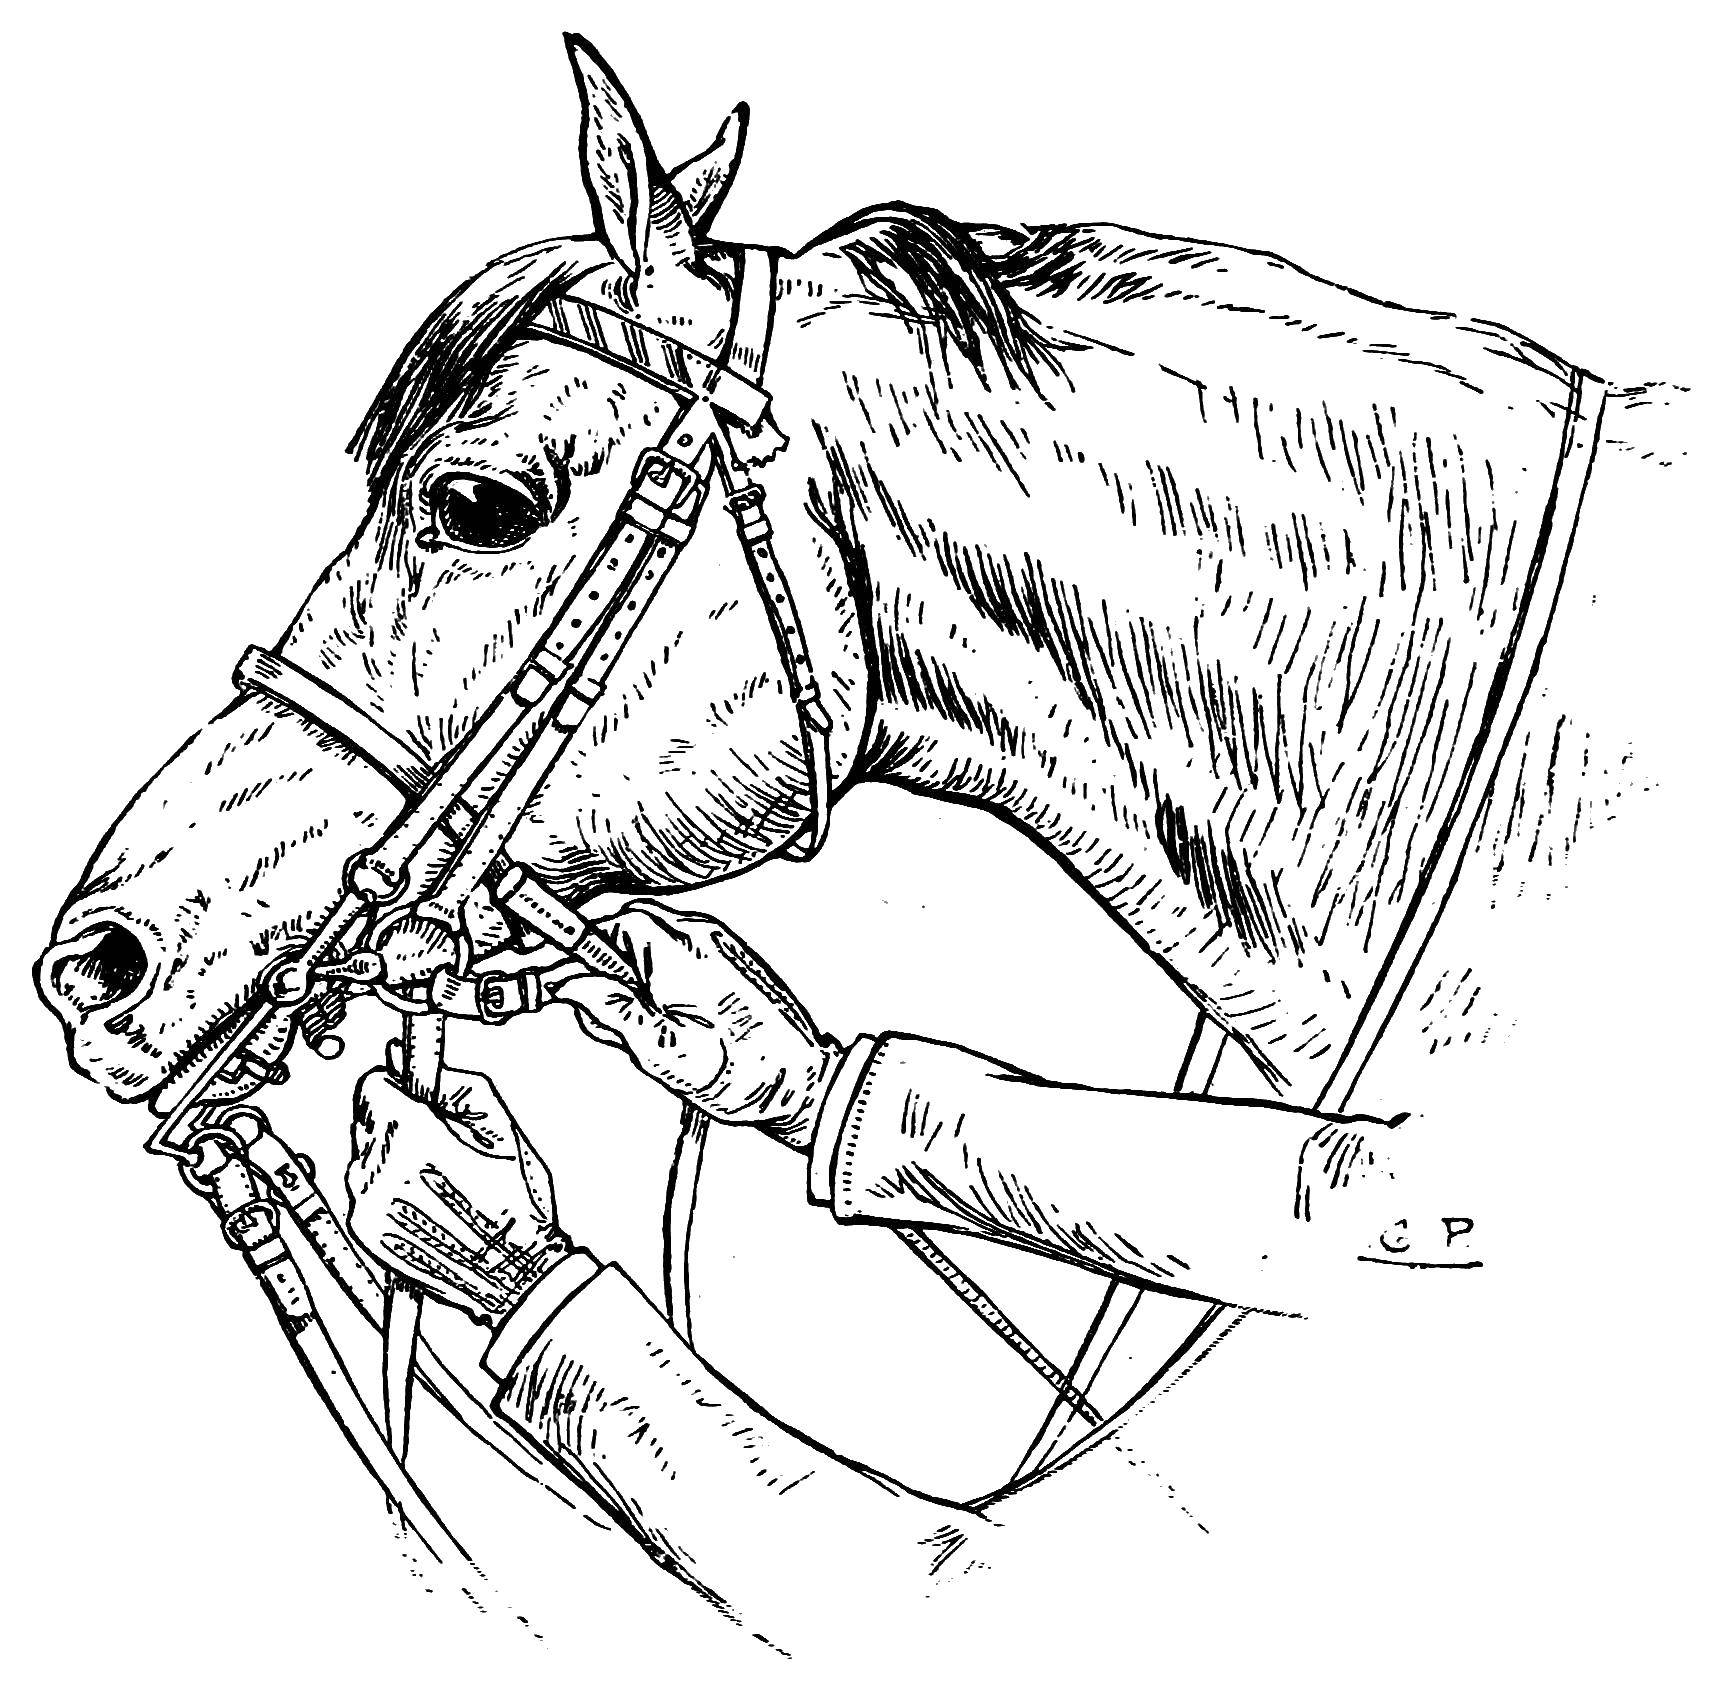 Coloring The harness for the horse. Category Animals. Tags:  Animals, horse.